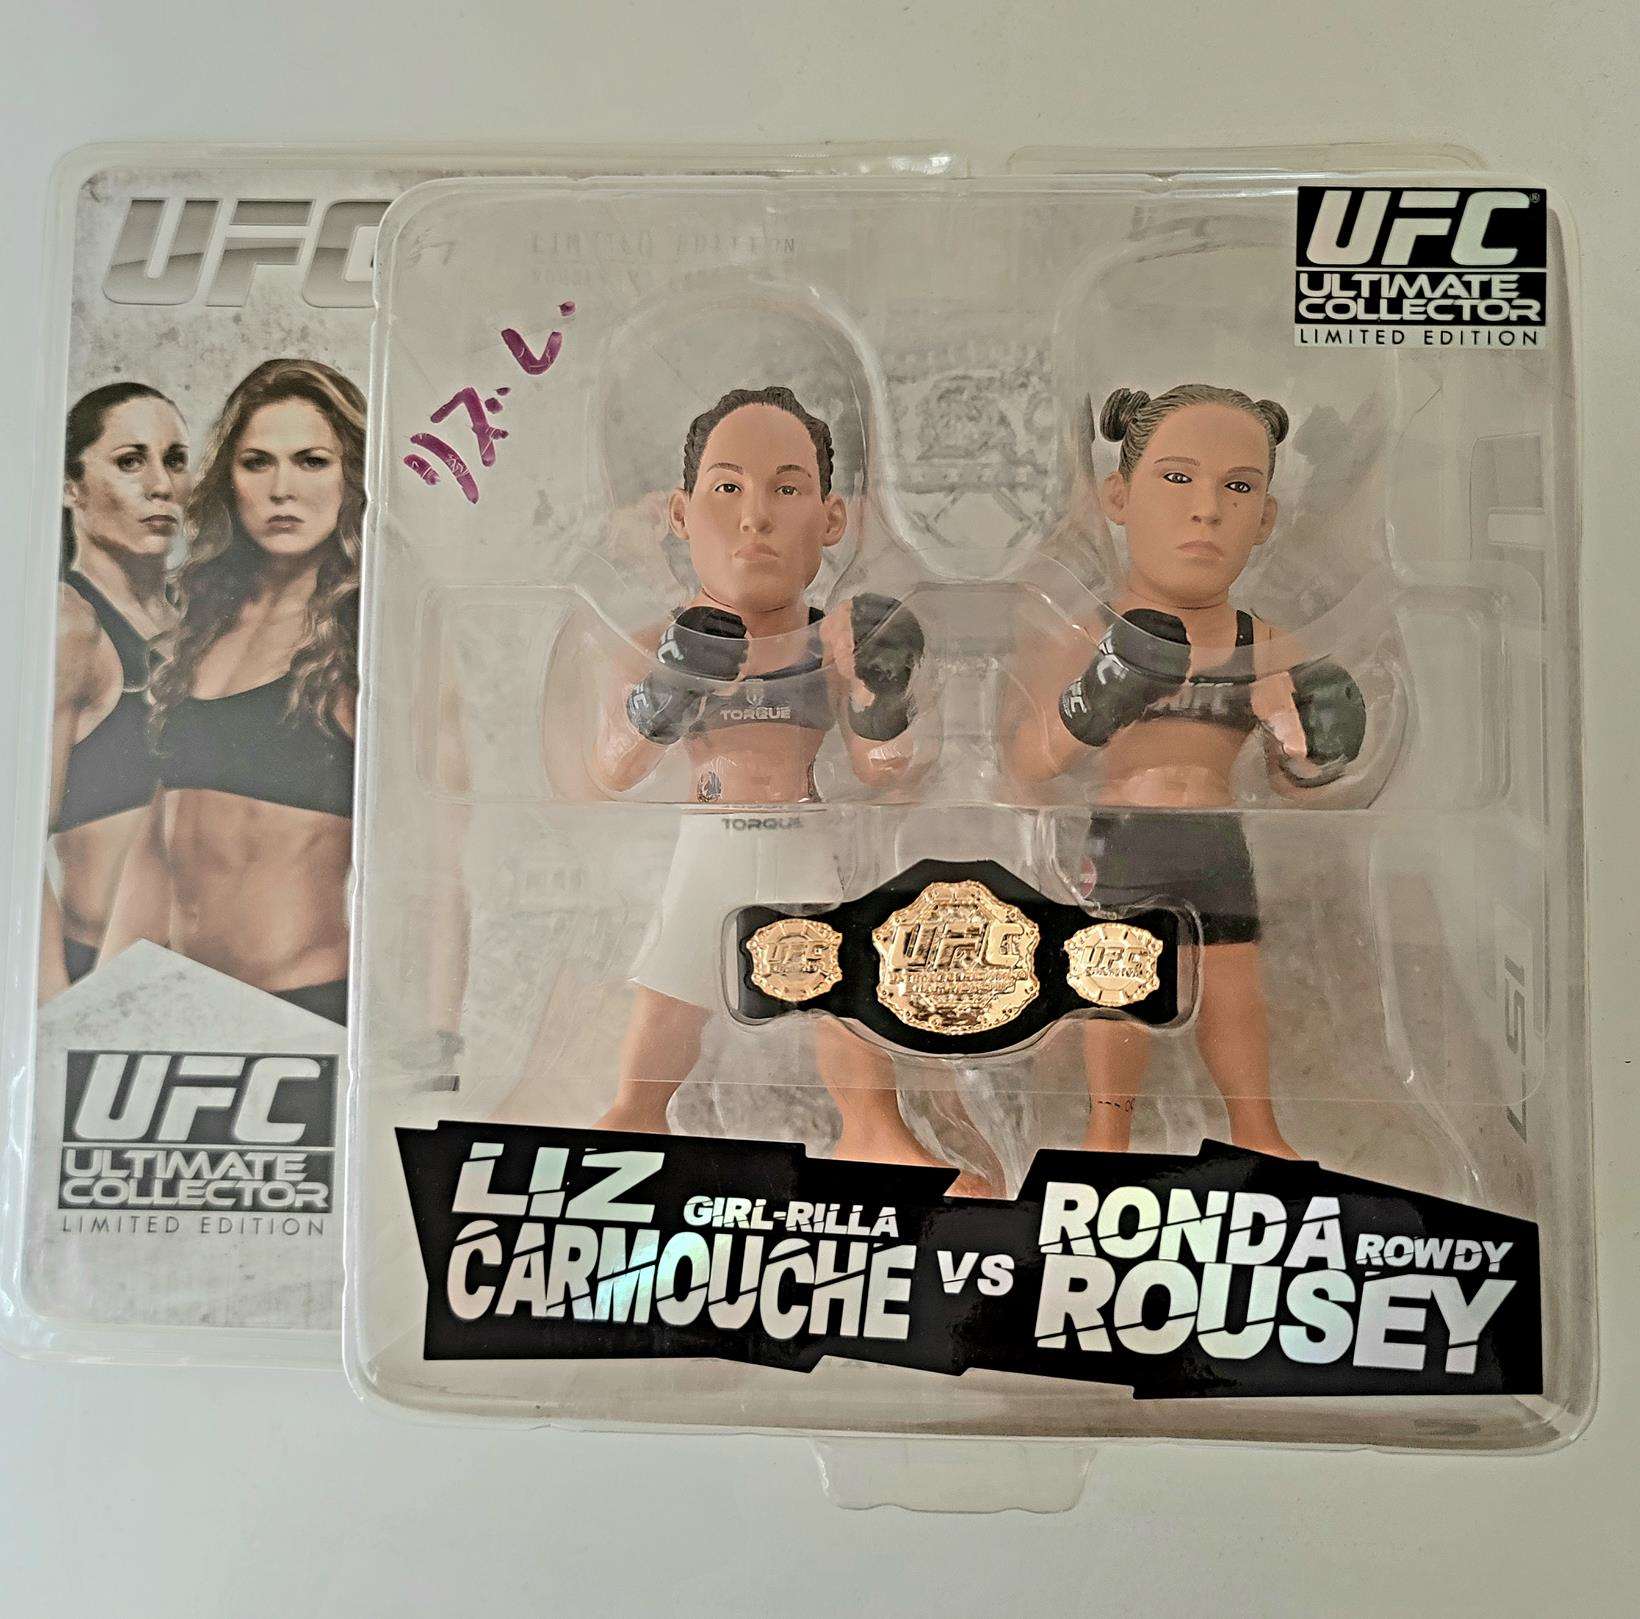 Ultimate Collector Series 14 Ltd Ed 2-Pack UFC 157 Rousey vs Carmouche, Signed